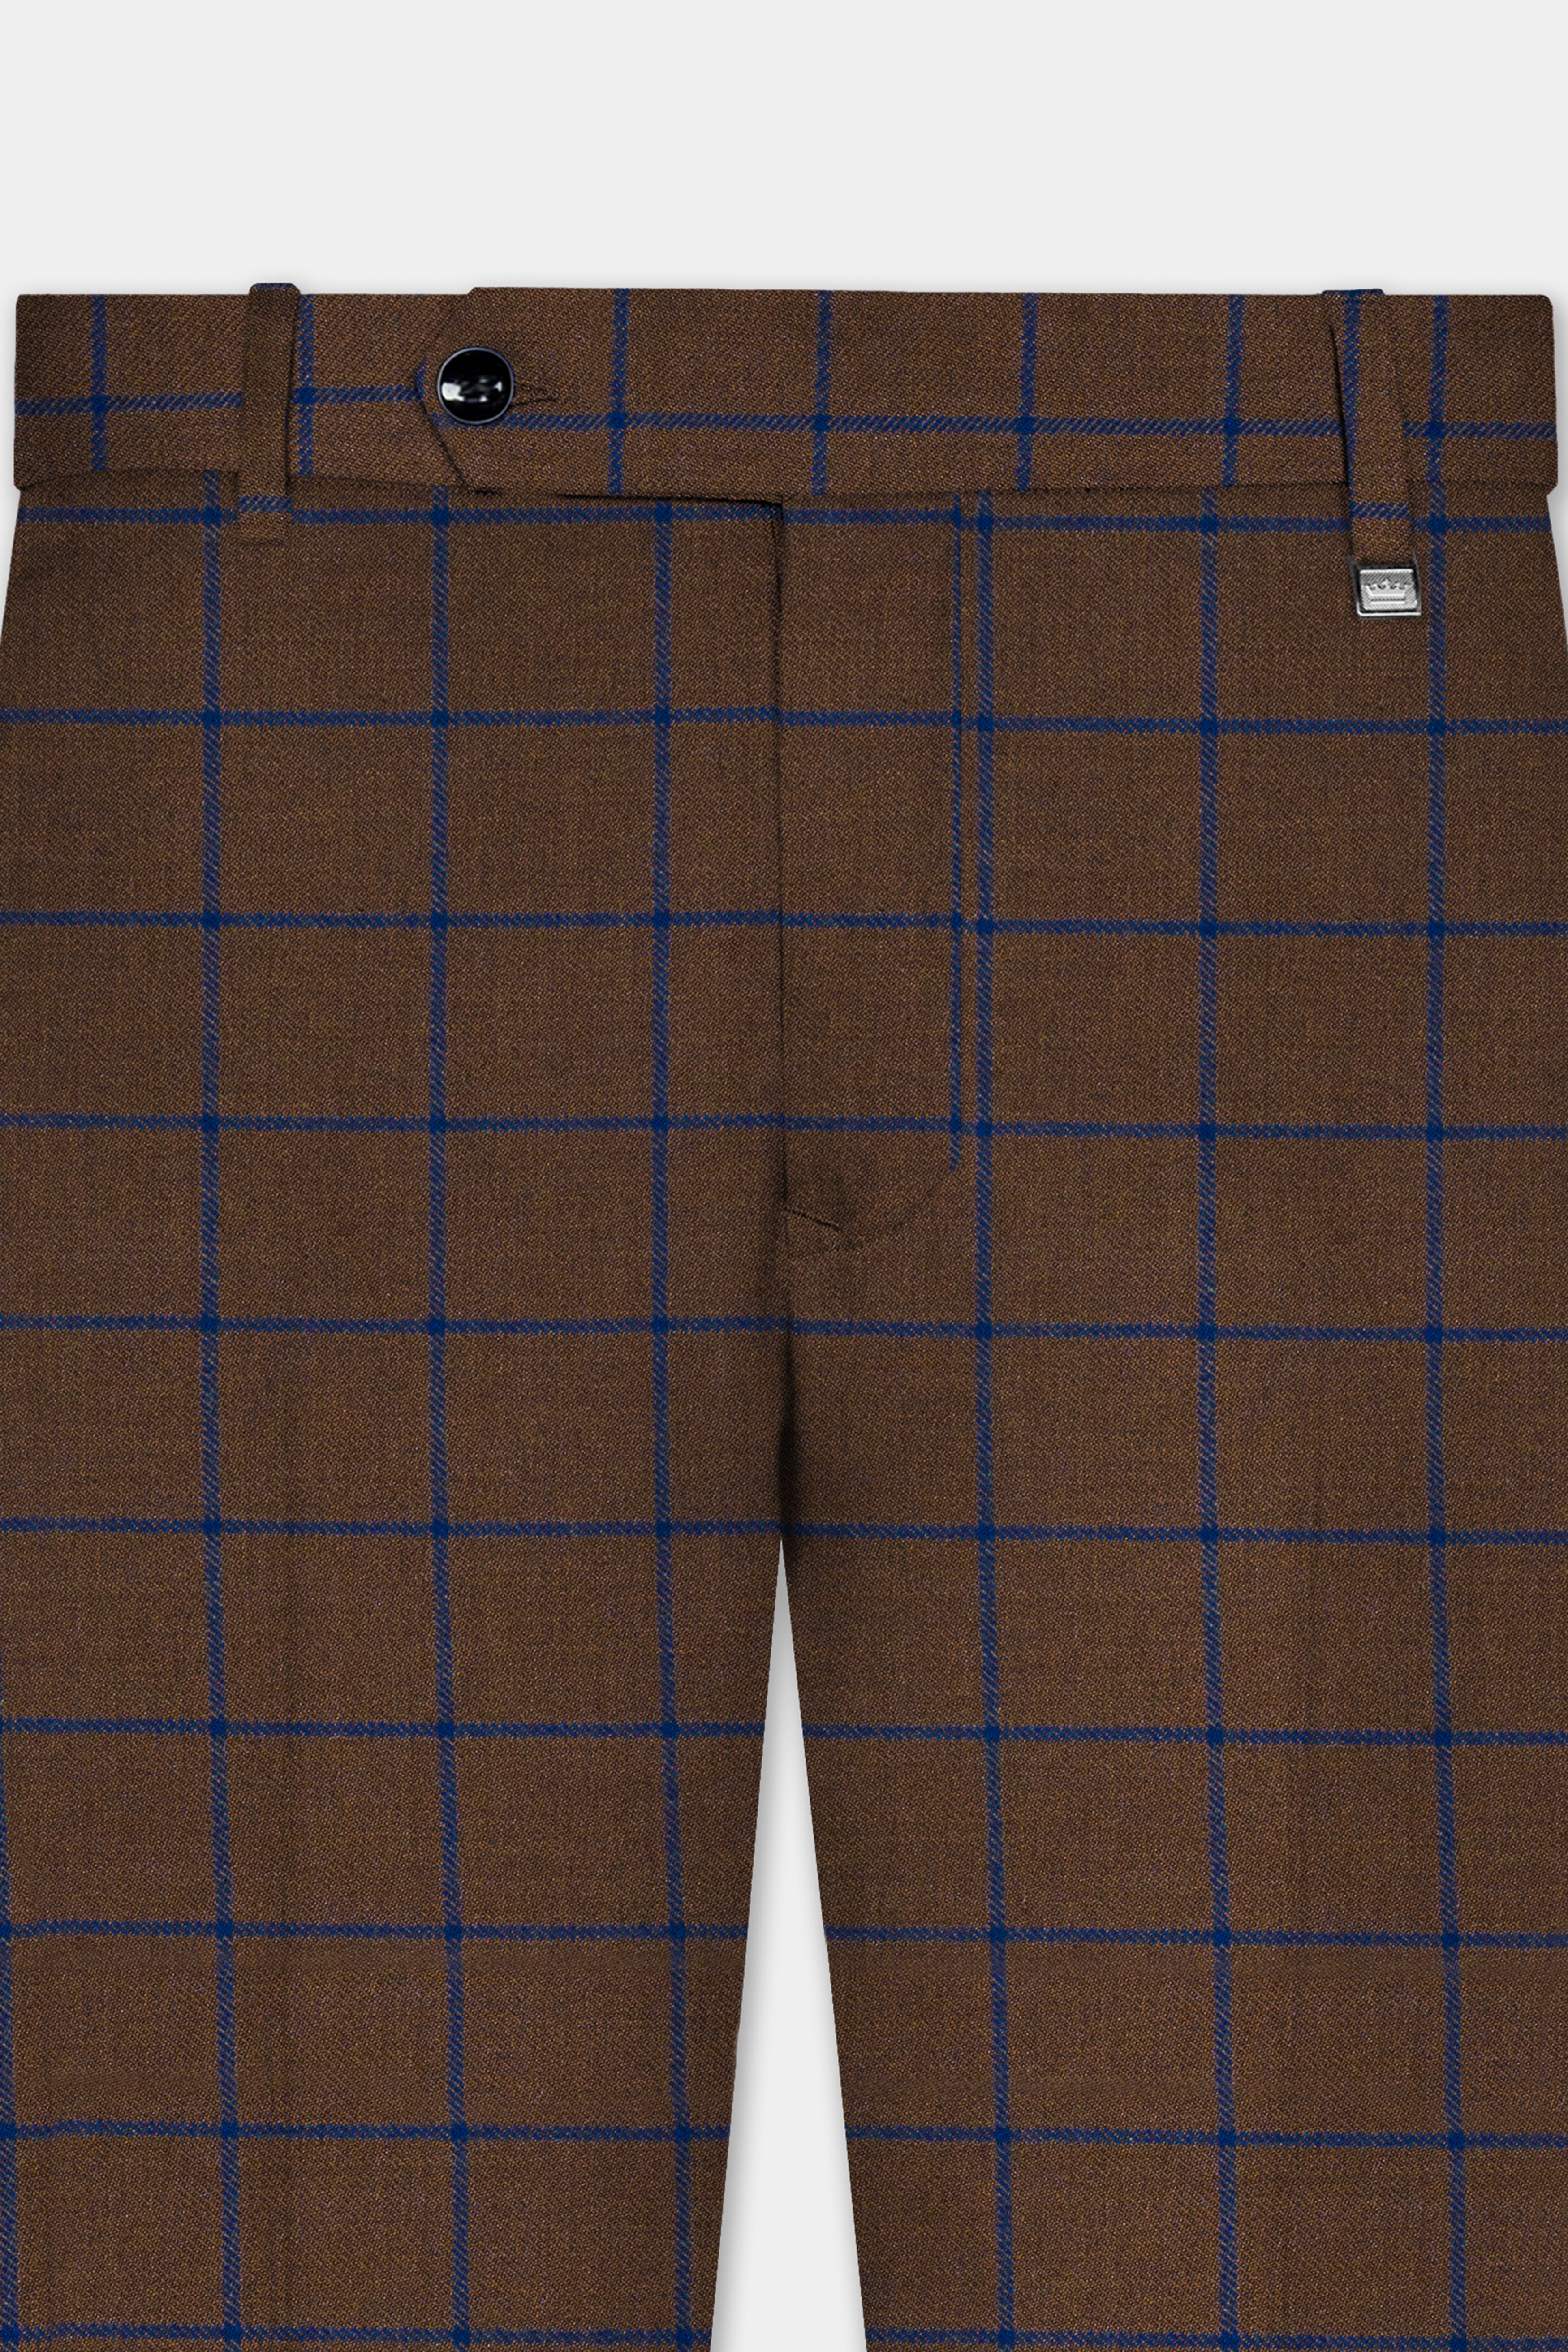 Bistre Brown with Catalina Blue Windowpane Tuxedo Tweed Suit